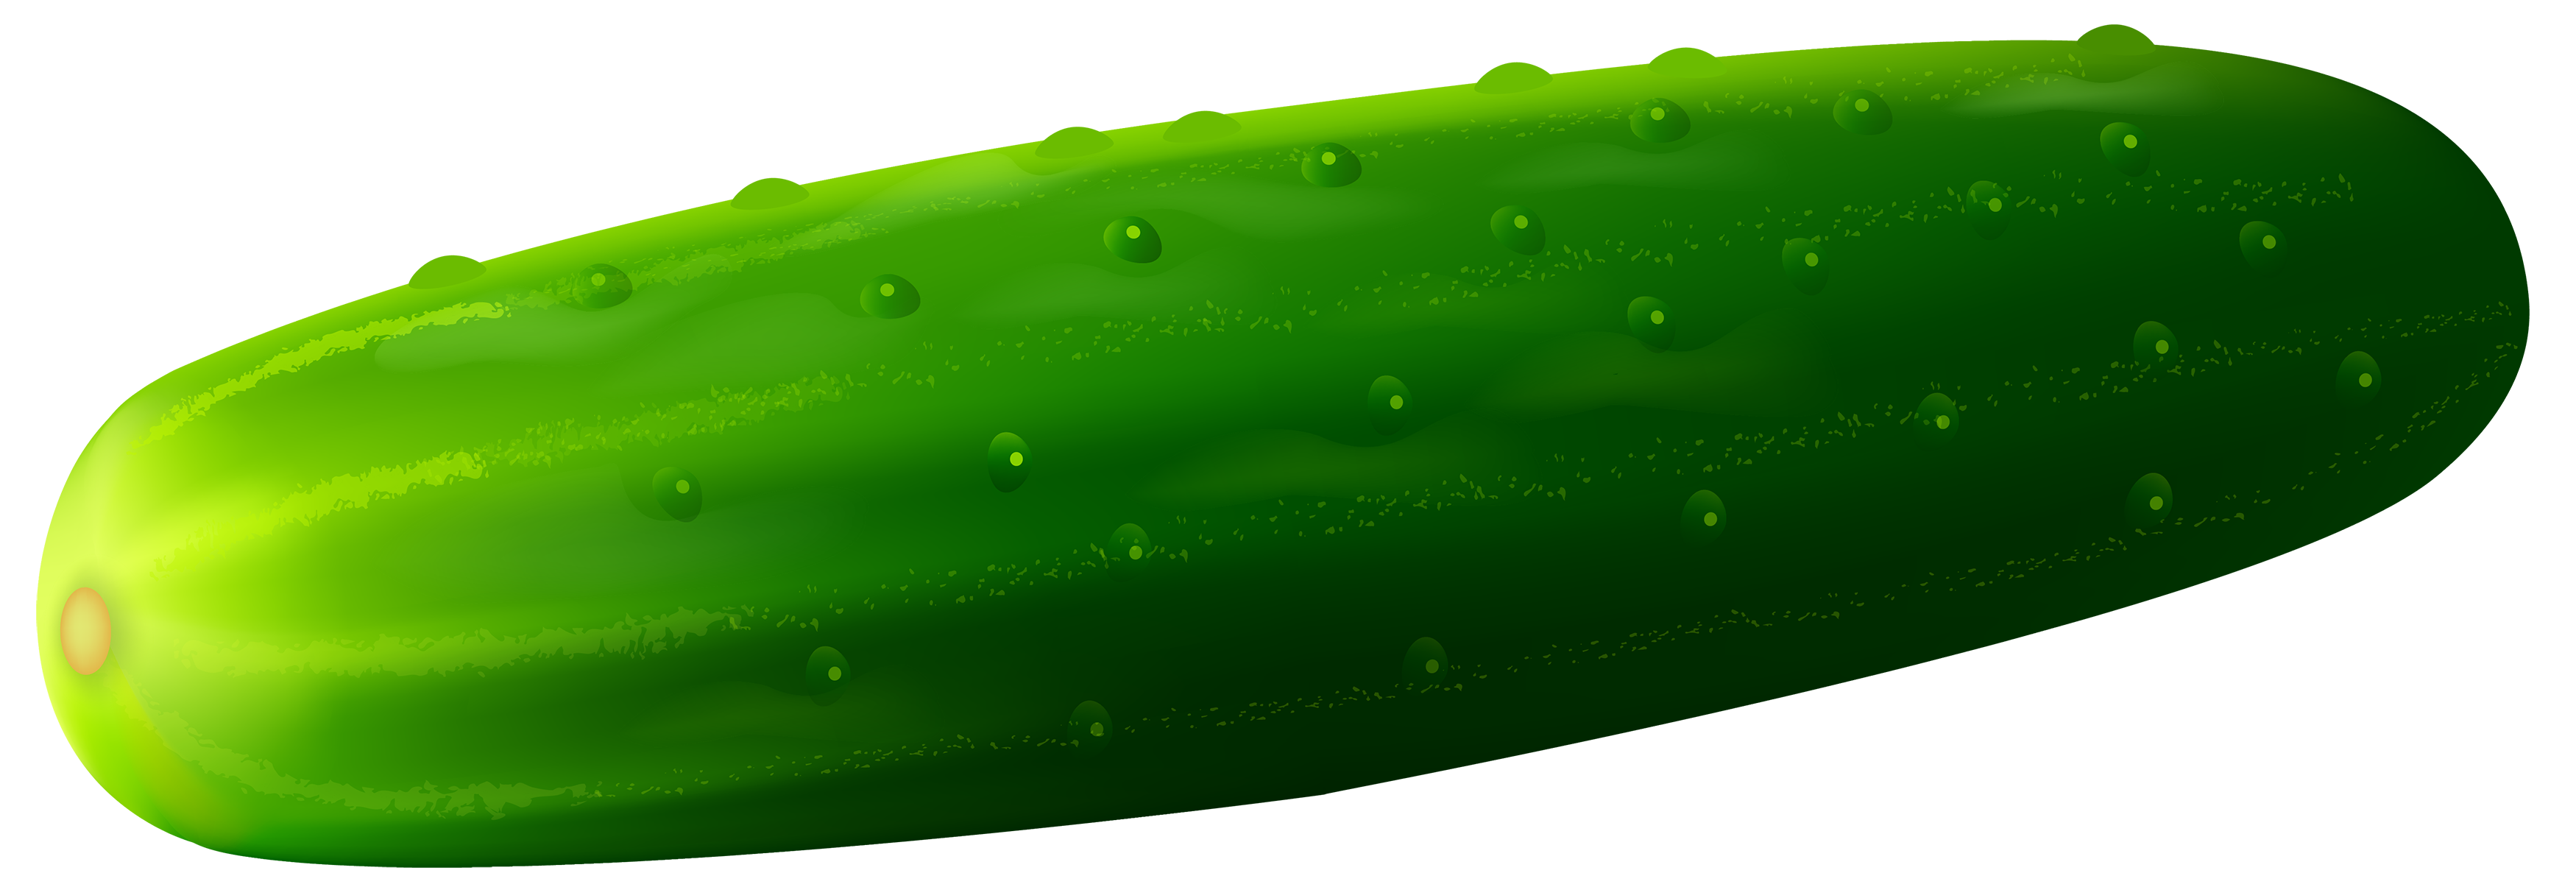 Cucumber clipart image web. Cucumber PNG image free download